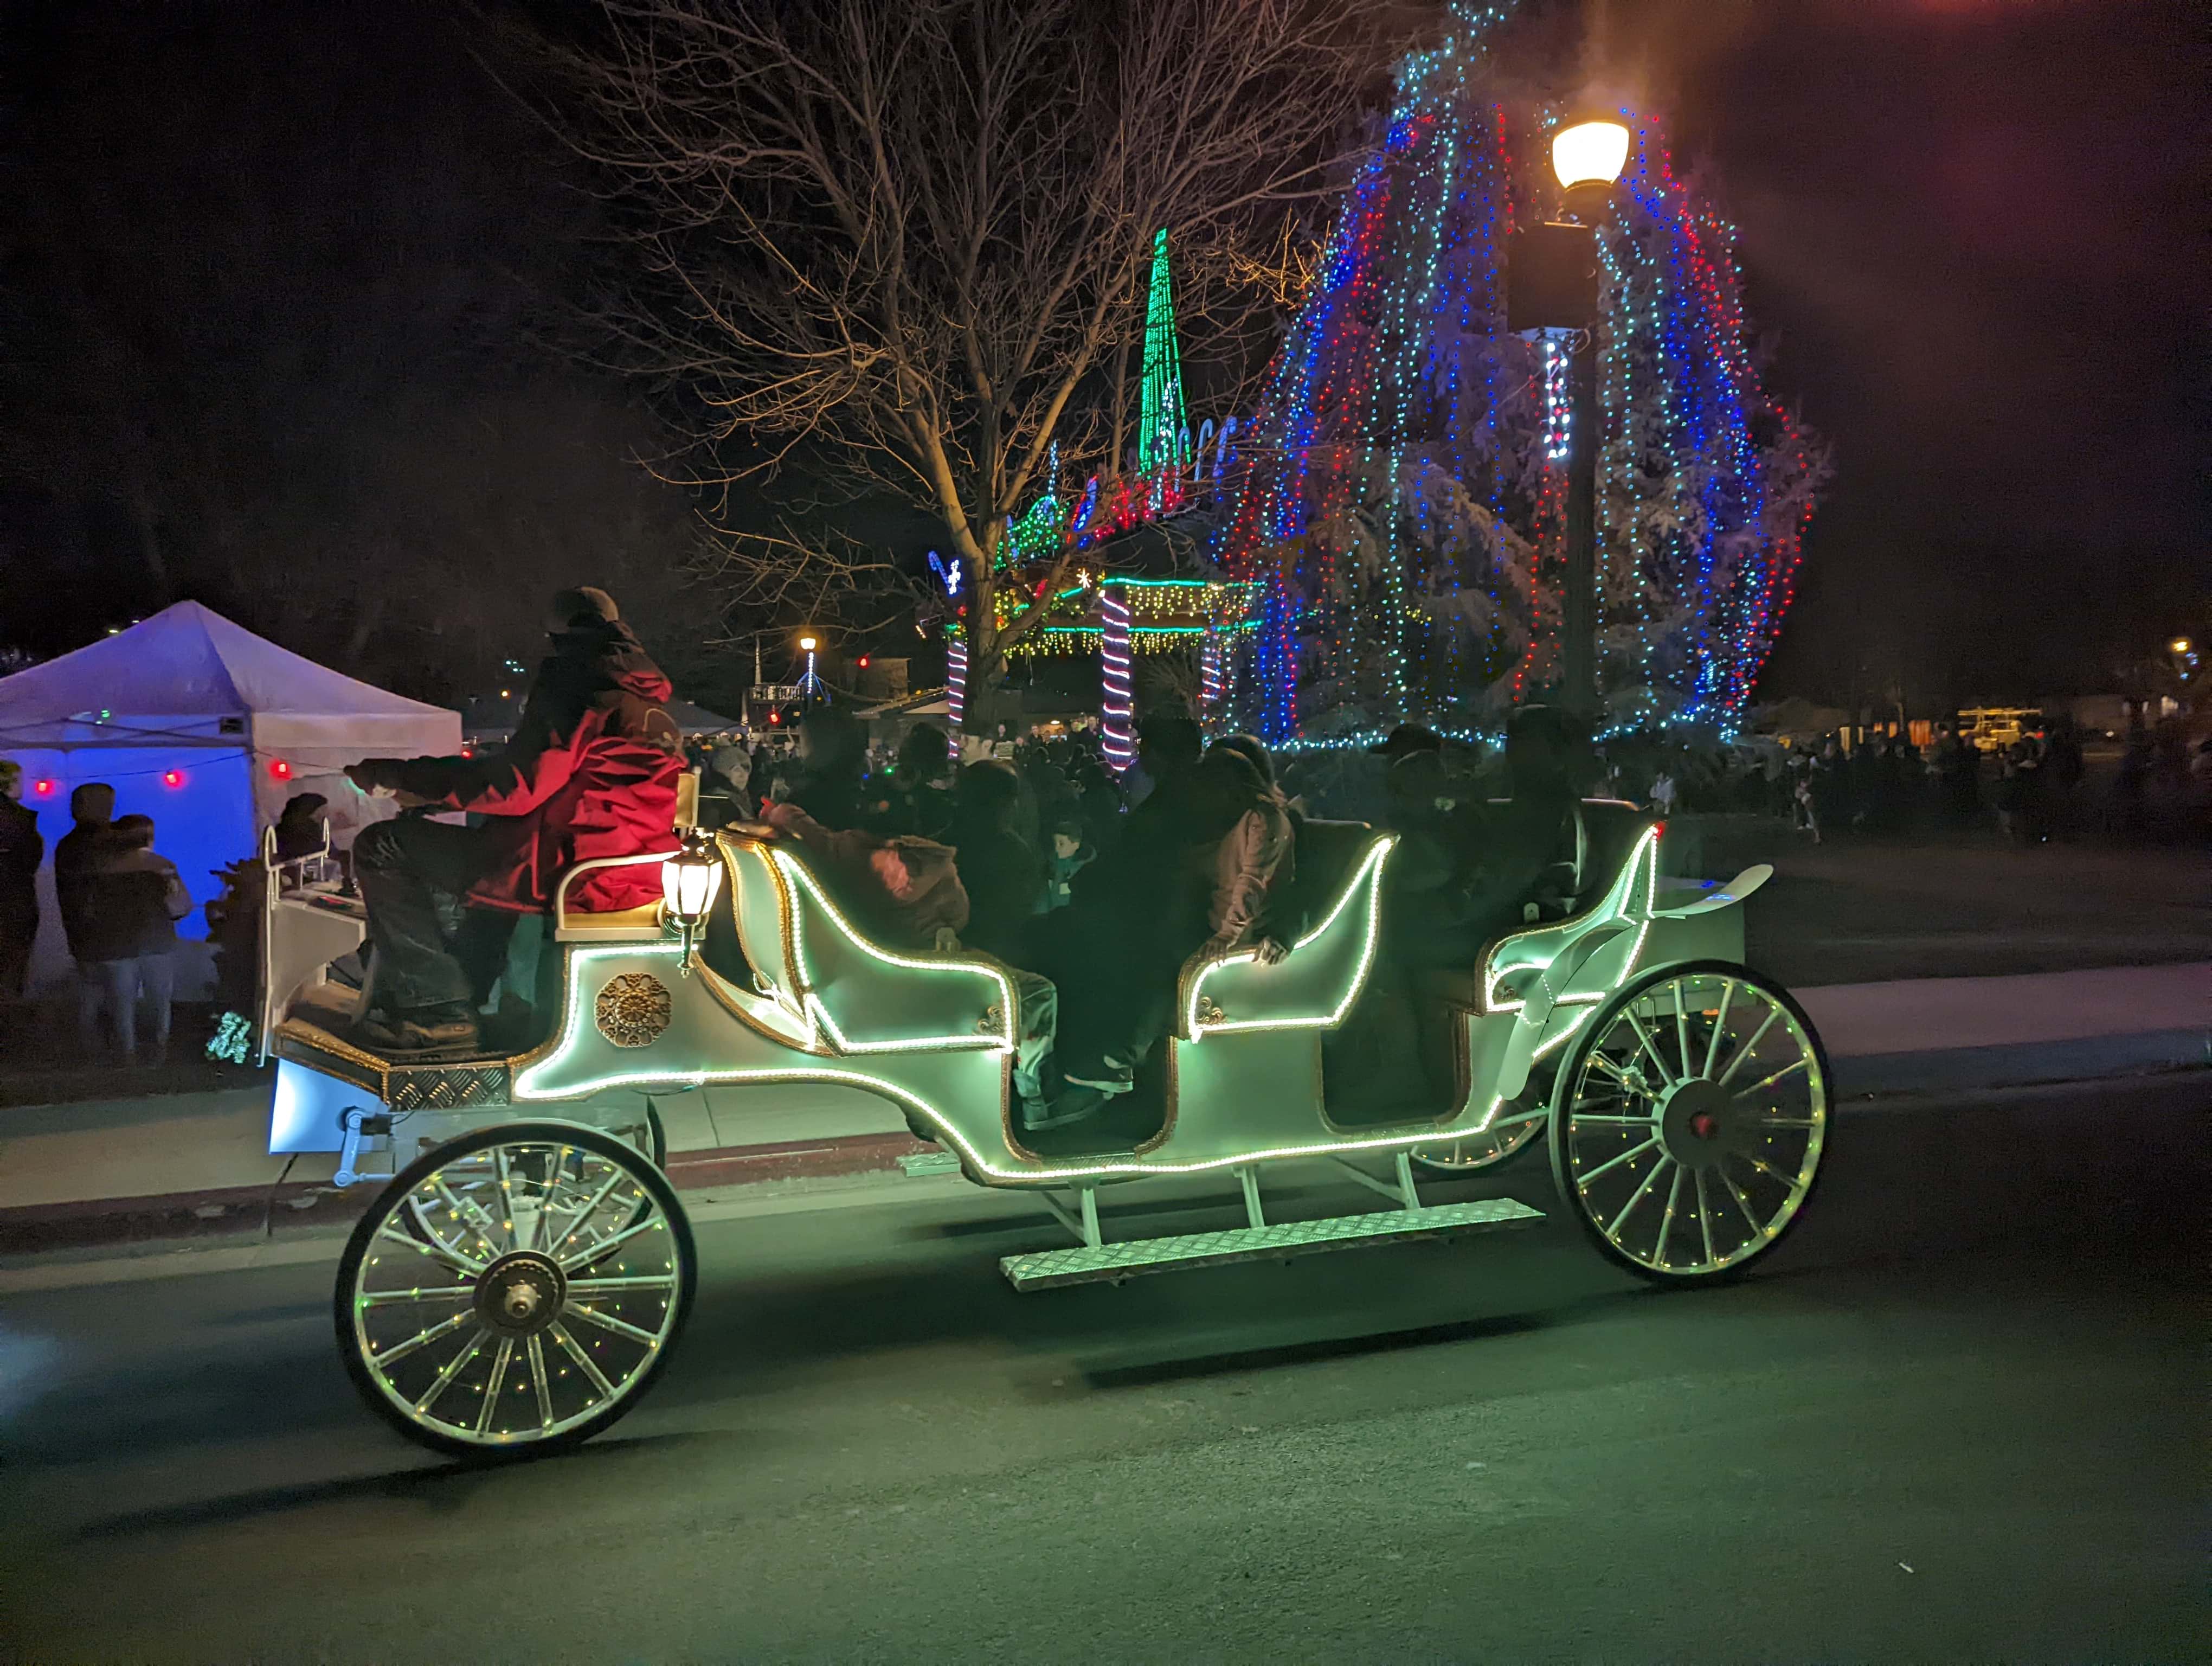 An e-carriage lit up at night for the holidays.